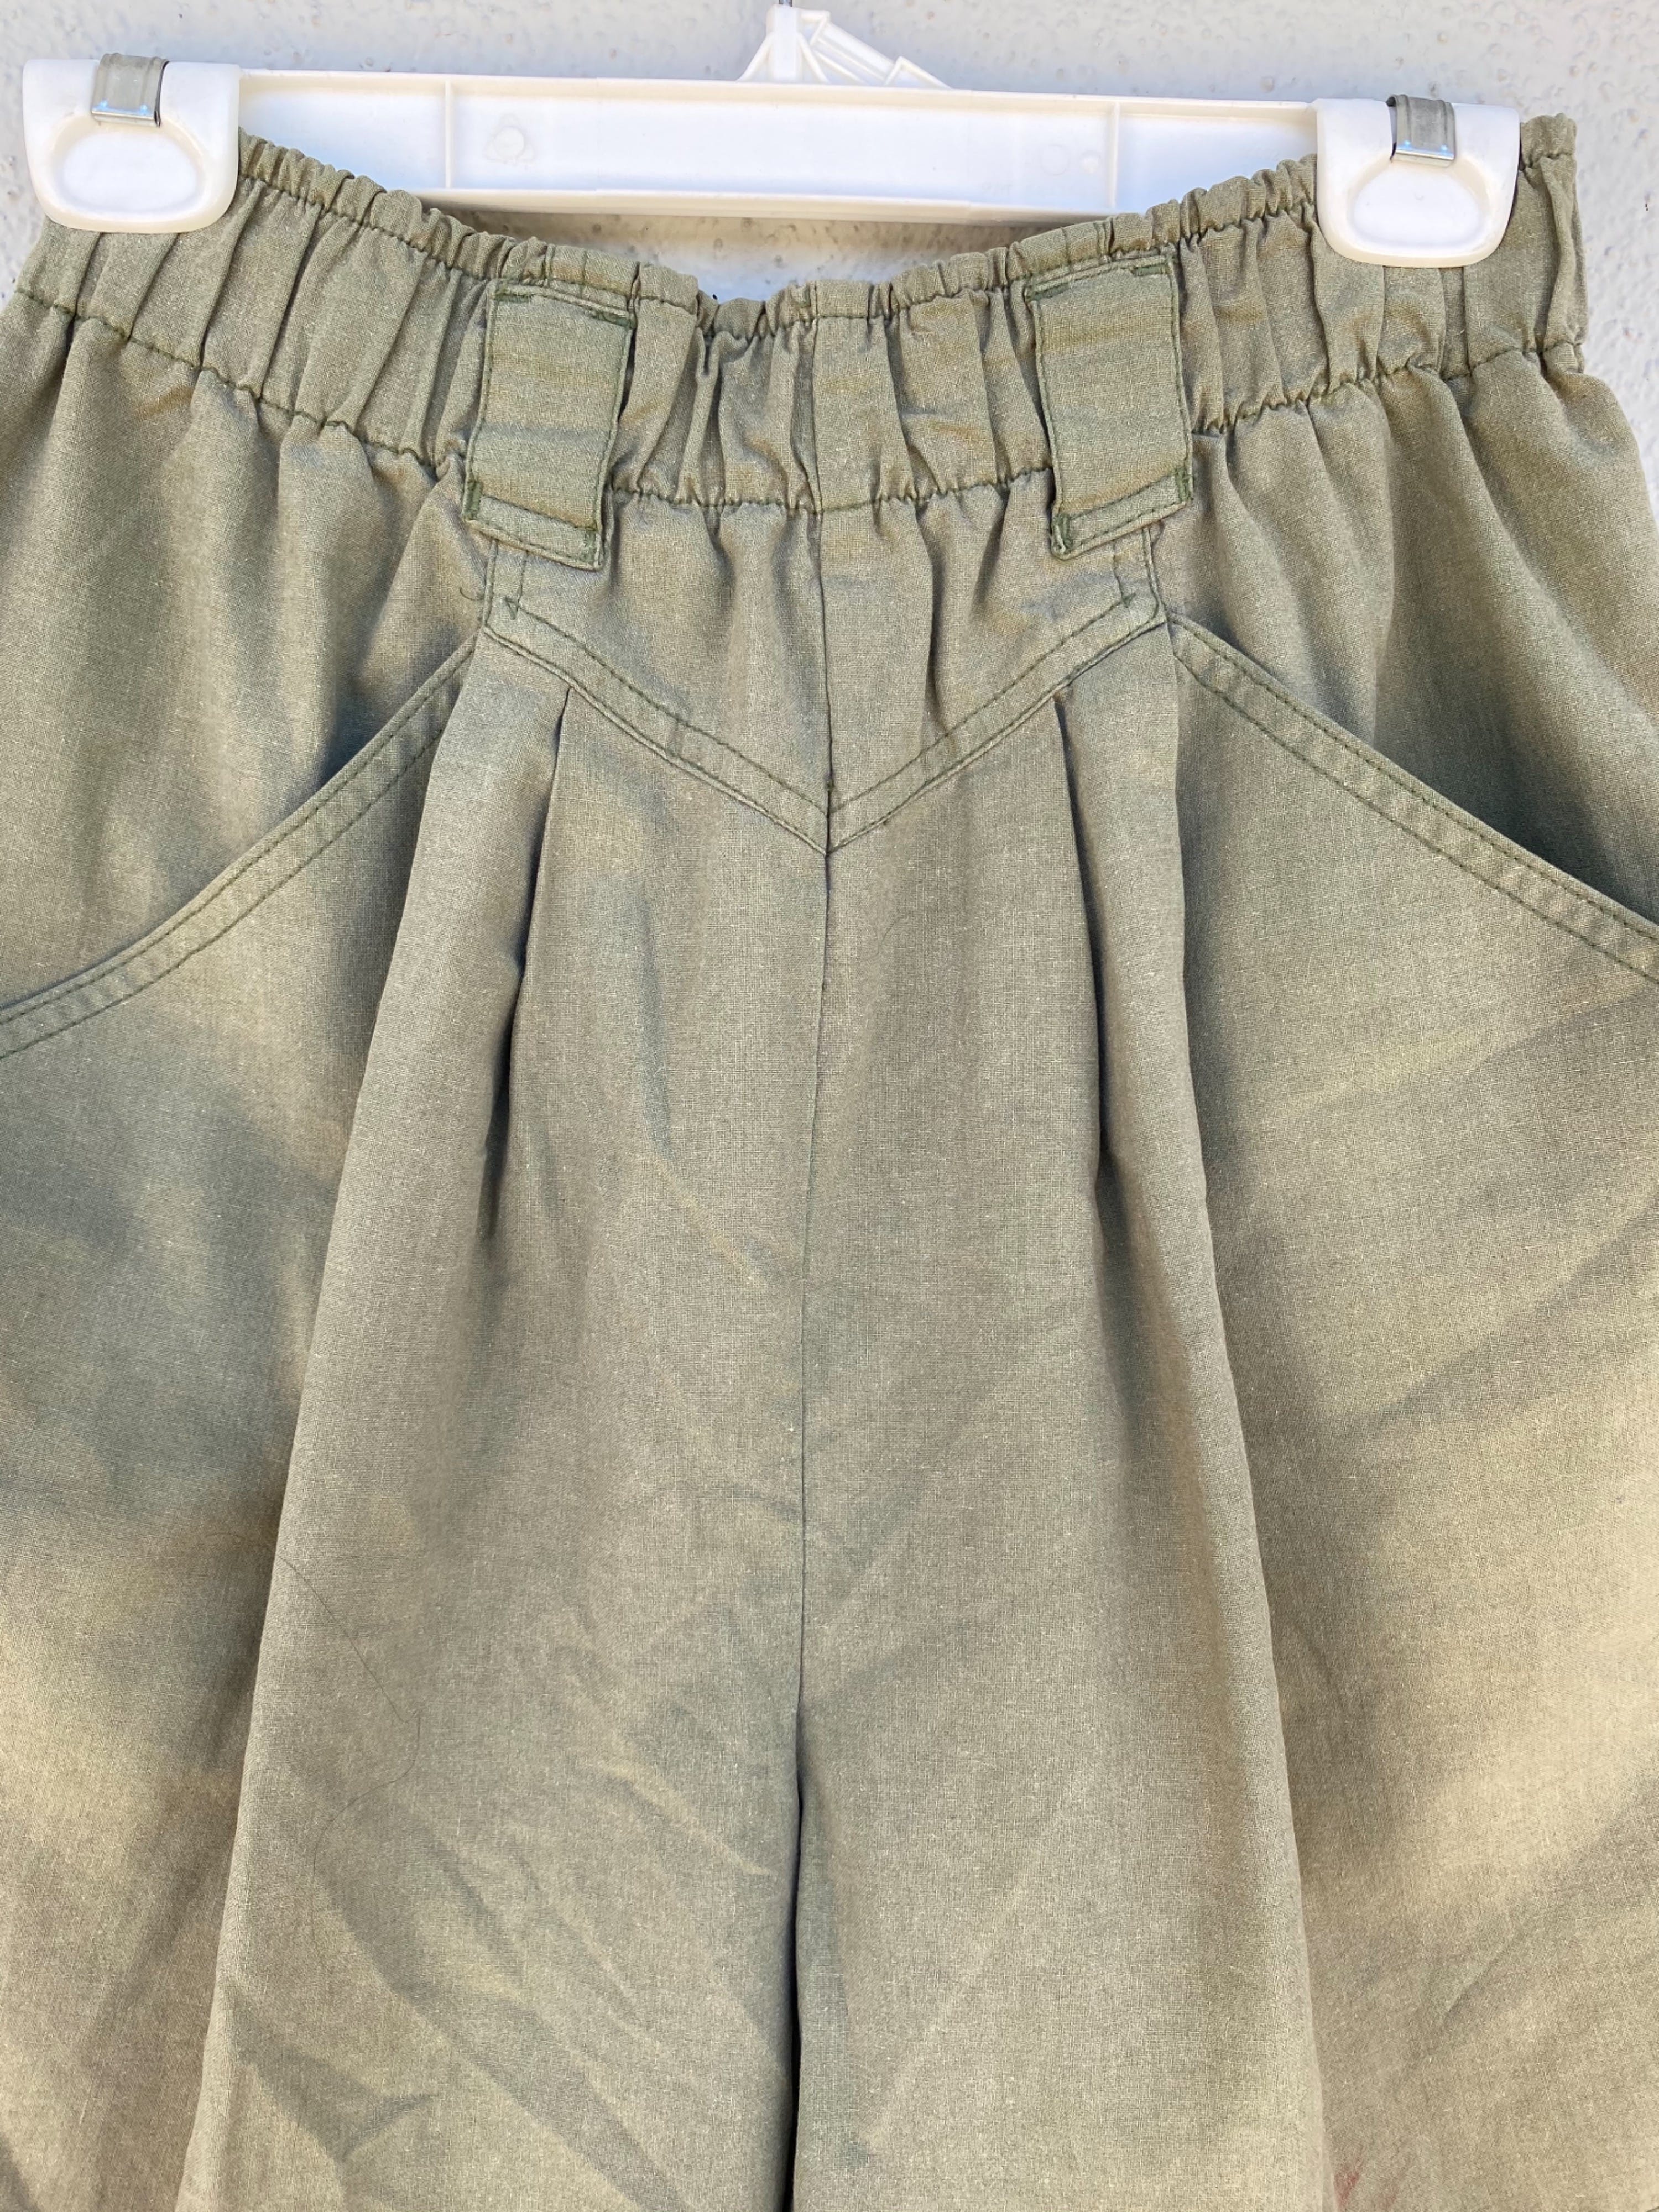 Vintage 70's Army Green Highwaisted Elastic Shorts with Pockets by ...